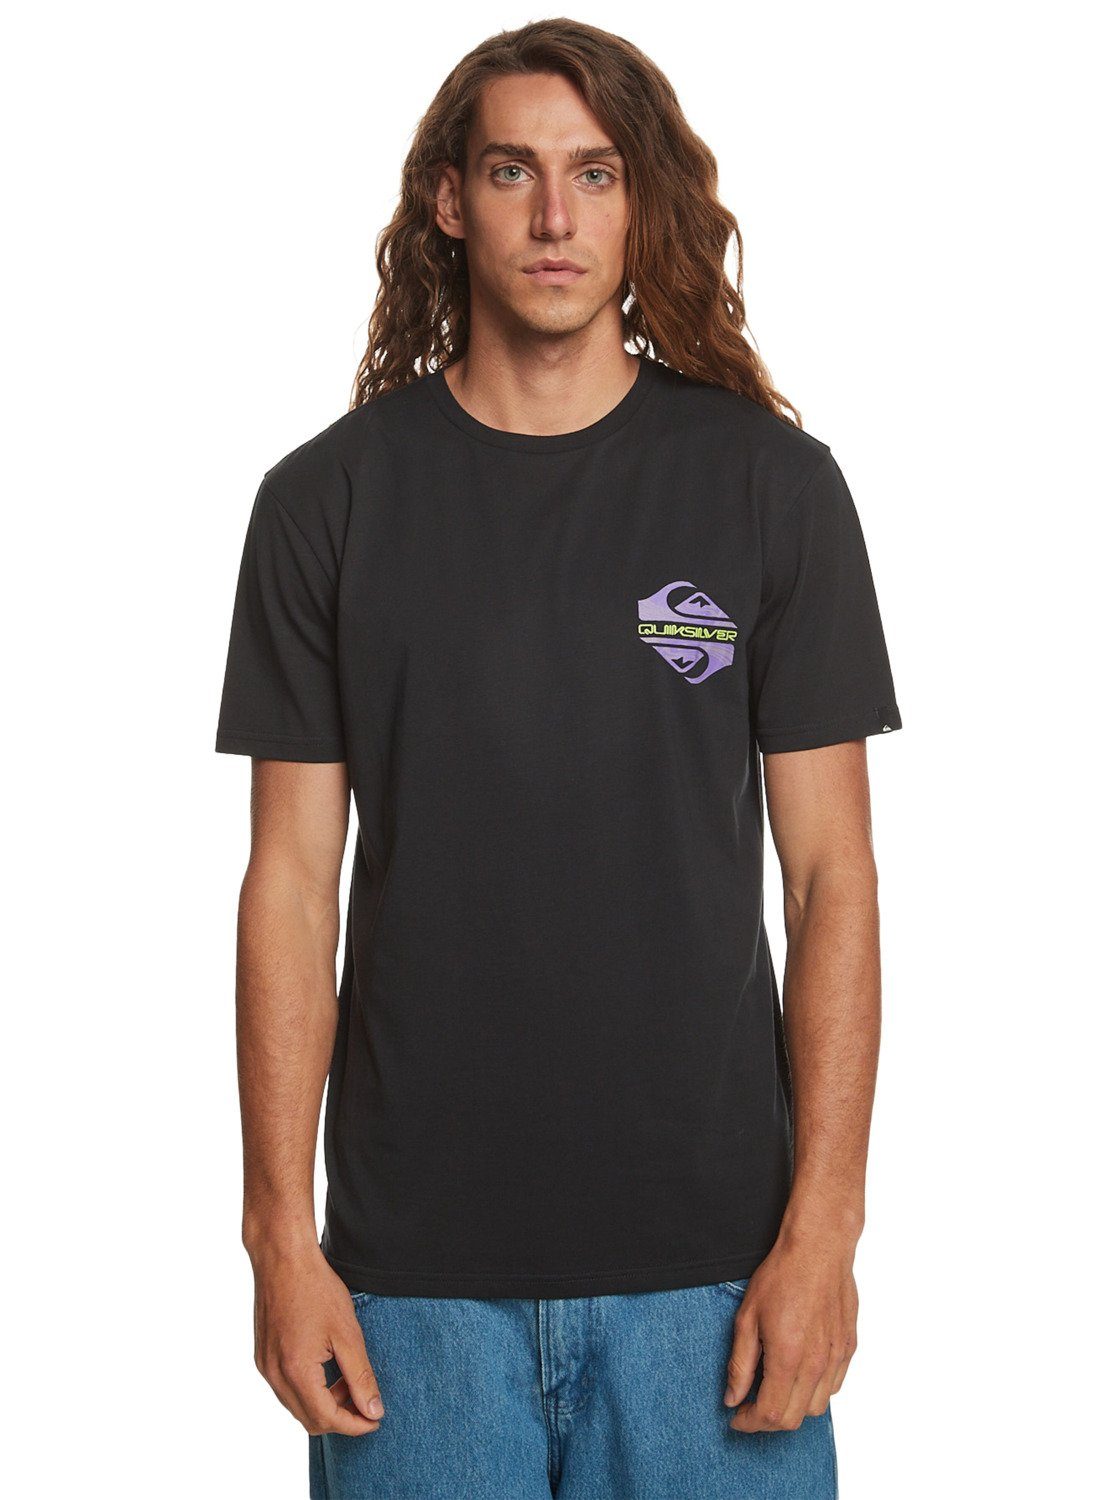 Quiksilver T-Shirt Twisted Mind Black